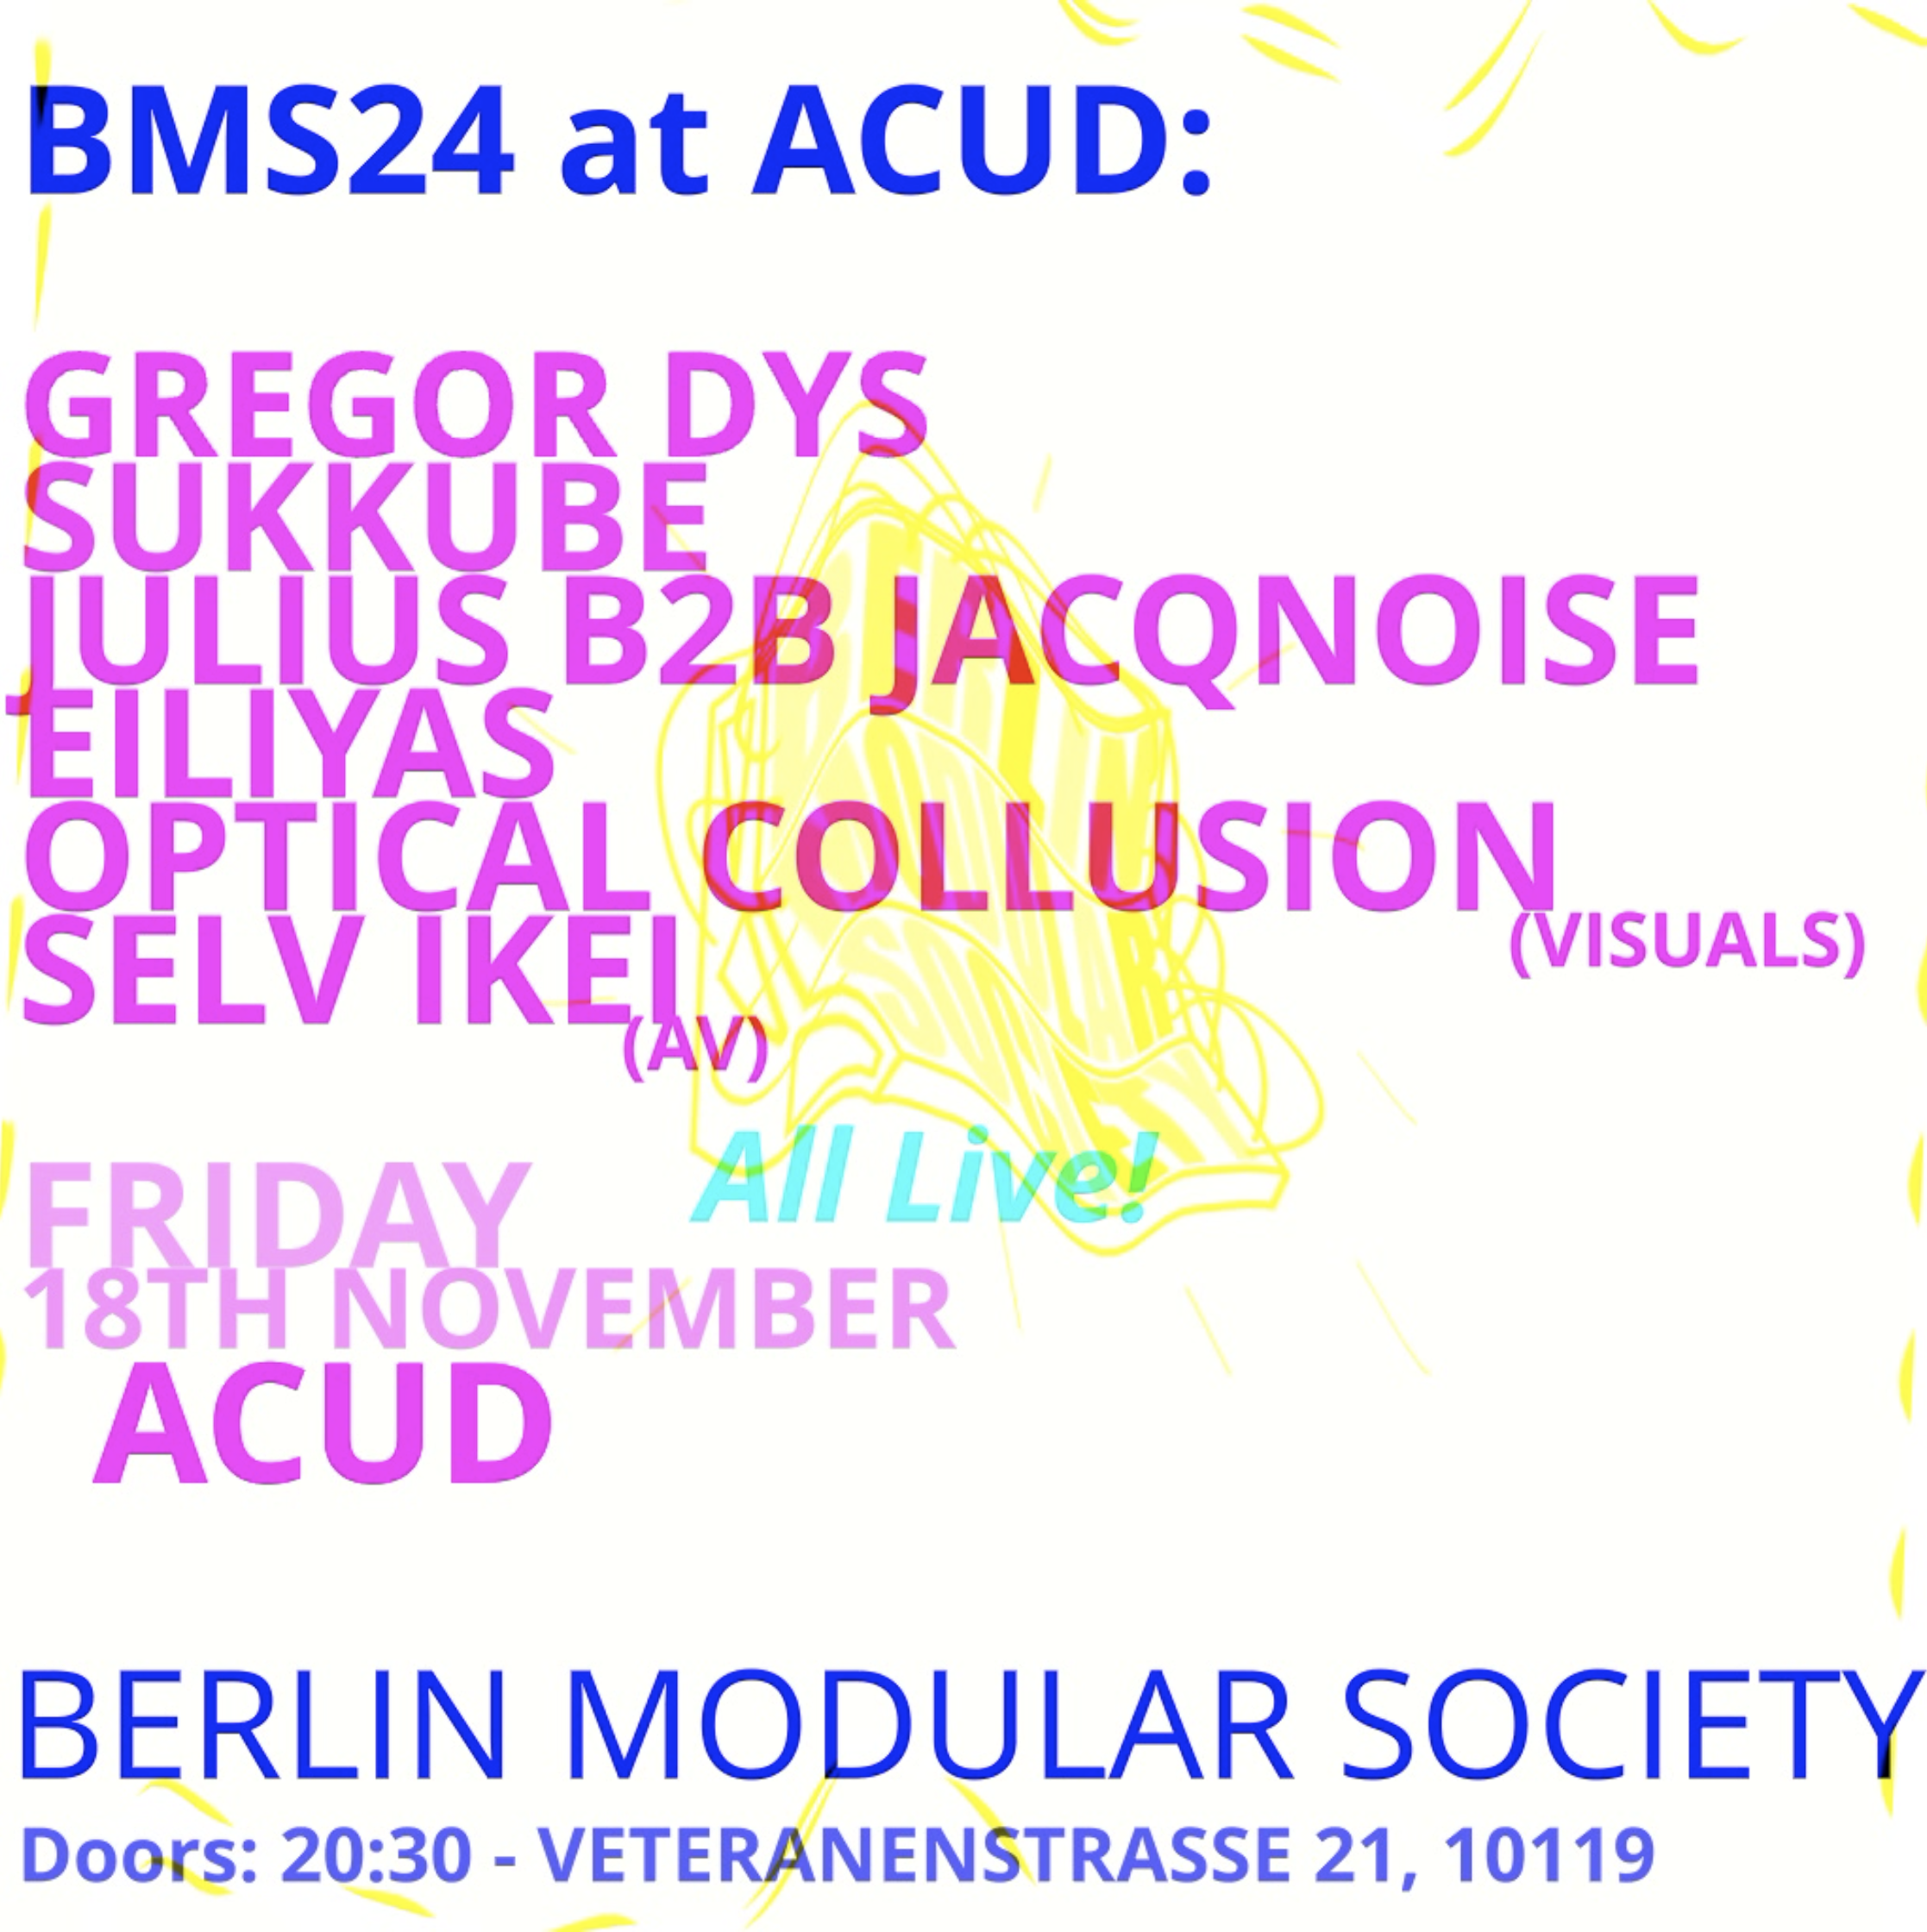 Berlin Modular Society w/ Gregor Dys, Sukkube, JacqNoise b2b, Julius Holtz and Optical Collusion and Selv Ikel